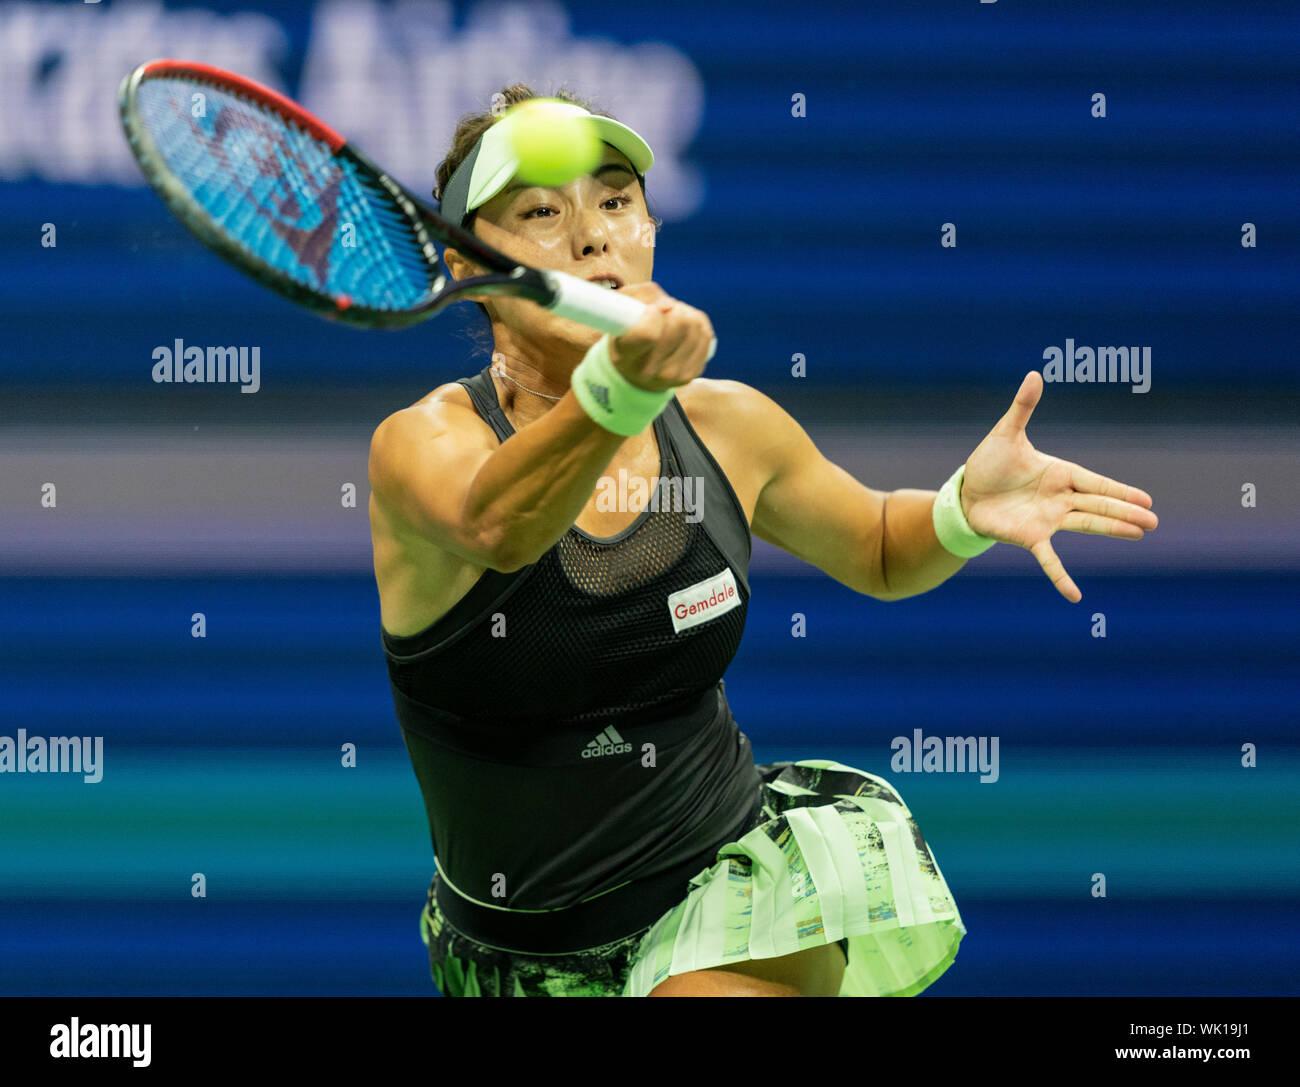 New York, NY - September 3, 2019: Qiang Wang (China) in action during quarter final of US Open Championships against Serena Williams (USA) at Billie Jean King National Tennis Center Stock Photo